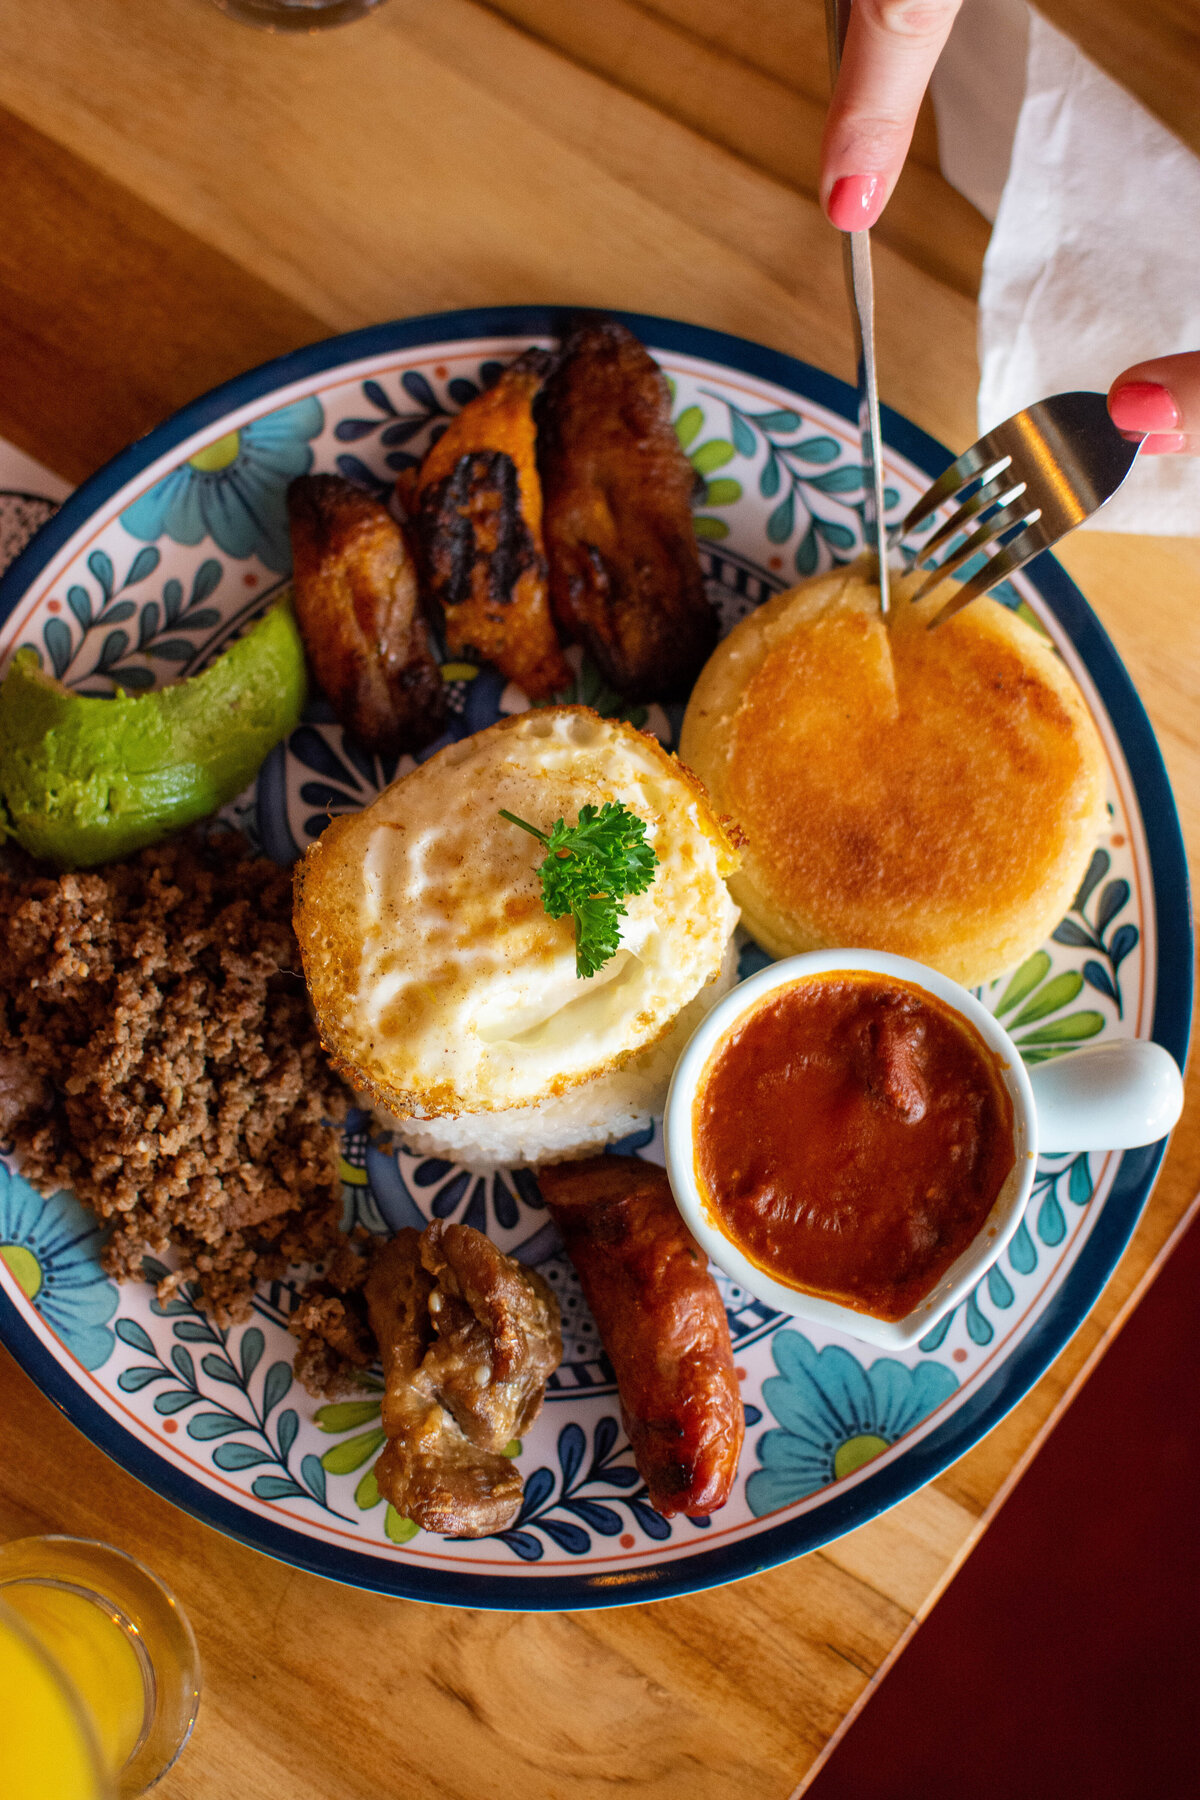 Hands with fork and knife reaching over blue and white plate filled with traditional Colombian food